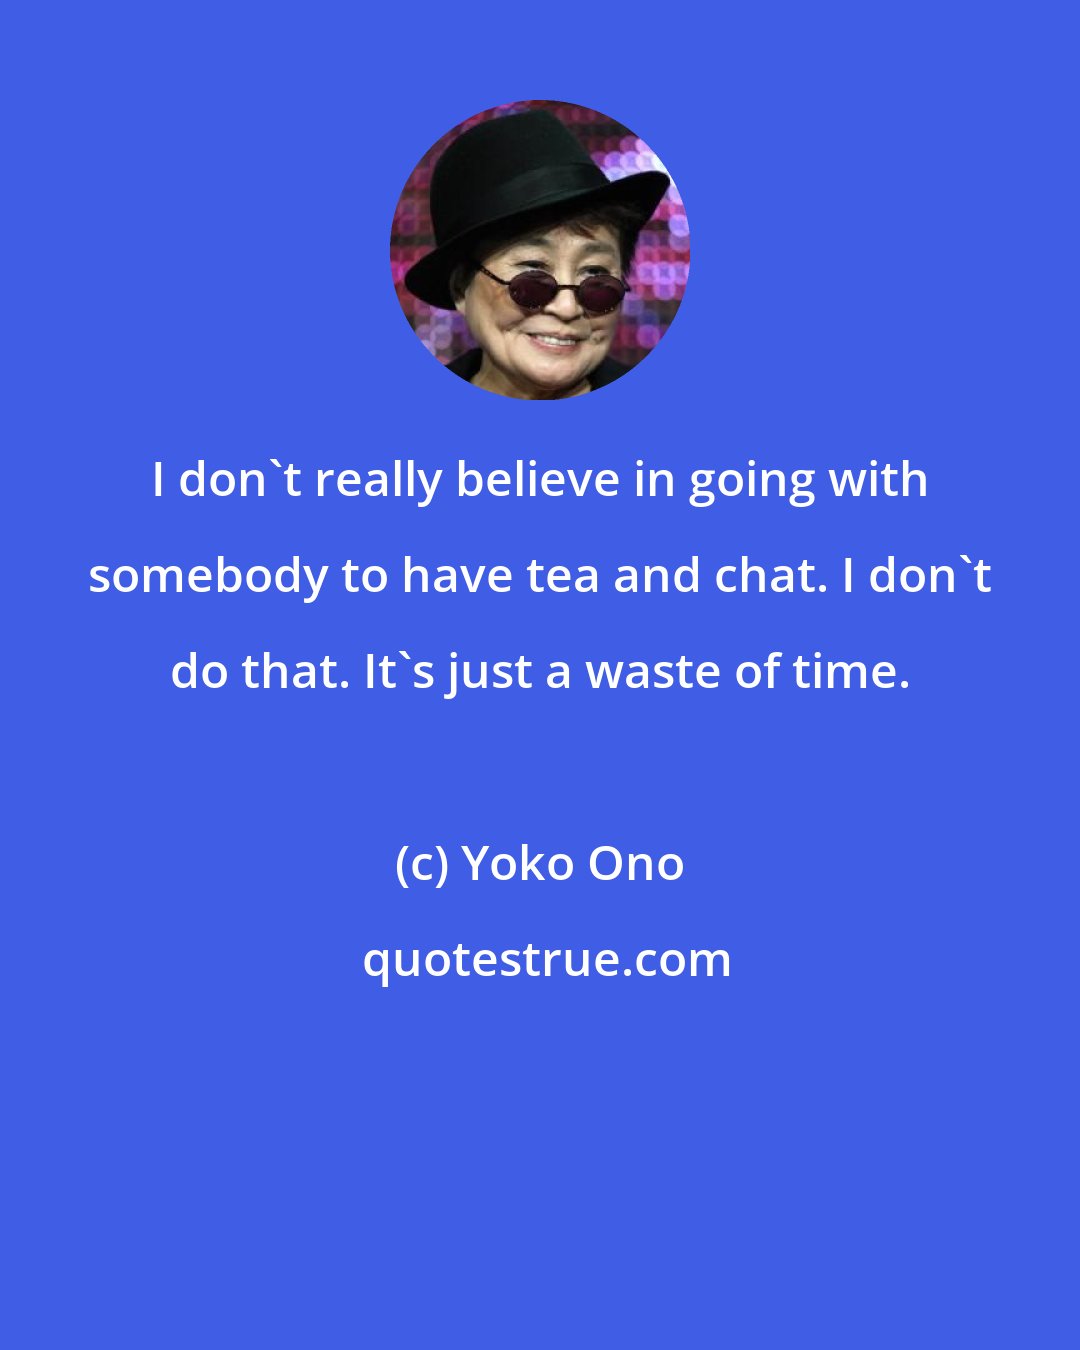 Yoko Ono: I don't really believe in going with somebody to have tea and chat. I don't do that. It's just a waste of time.